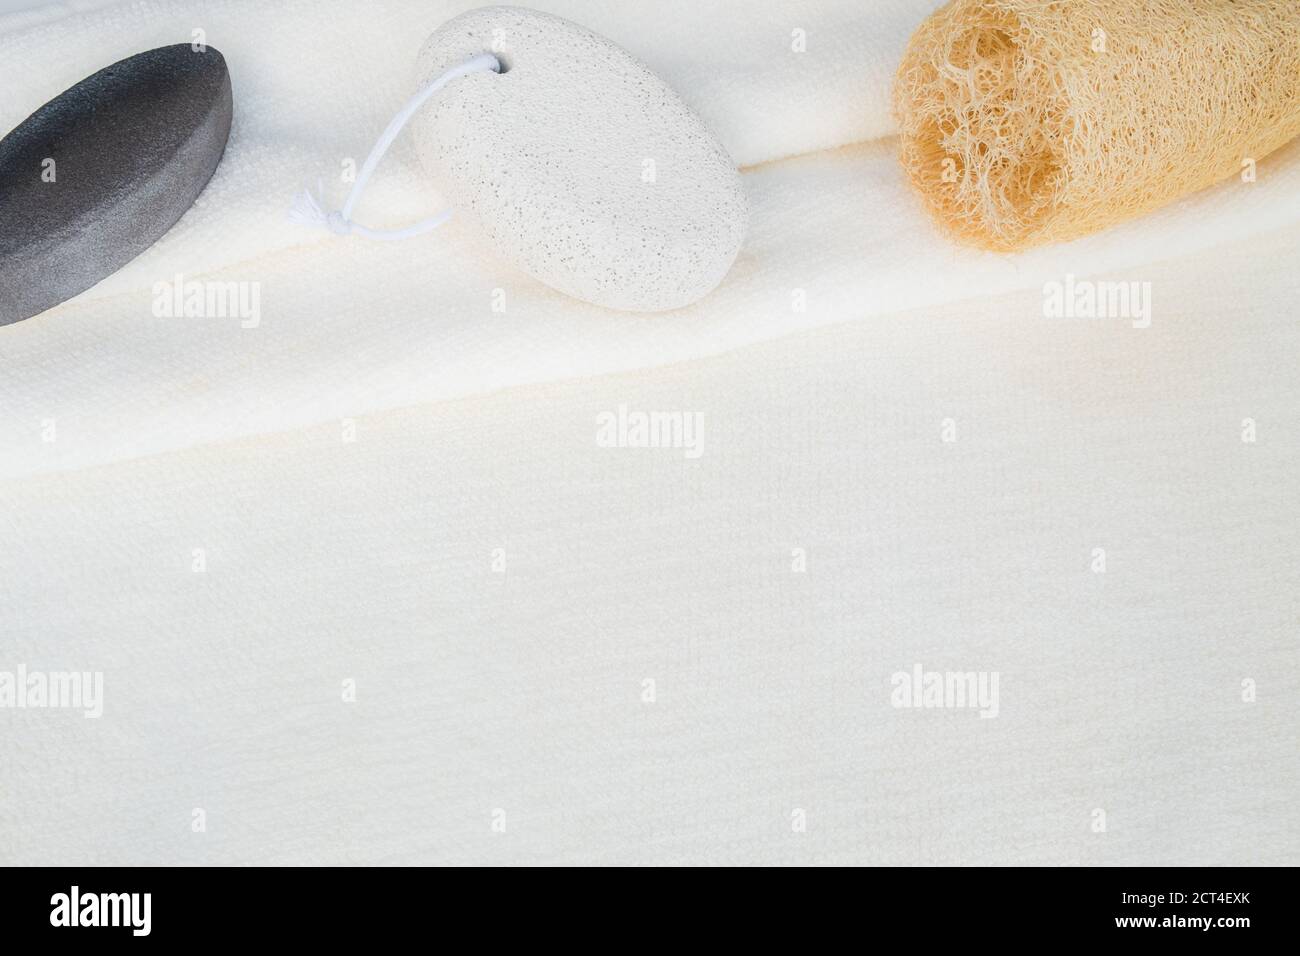 Top view flatlay soft white towel background for organic natural body and foot scrub exfoliating cleaning product display mockup in bathroom or spa Stock Photo